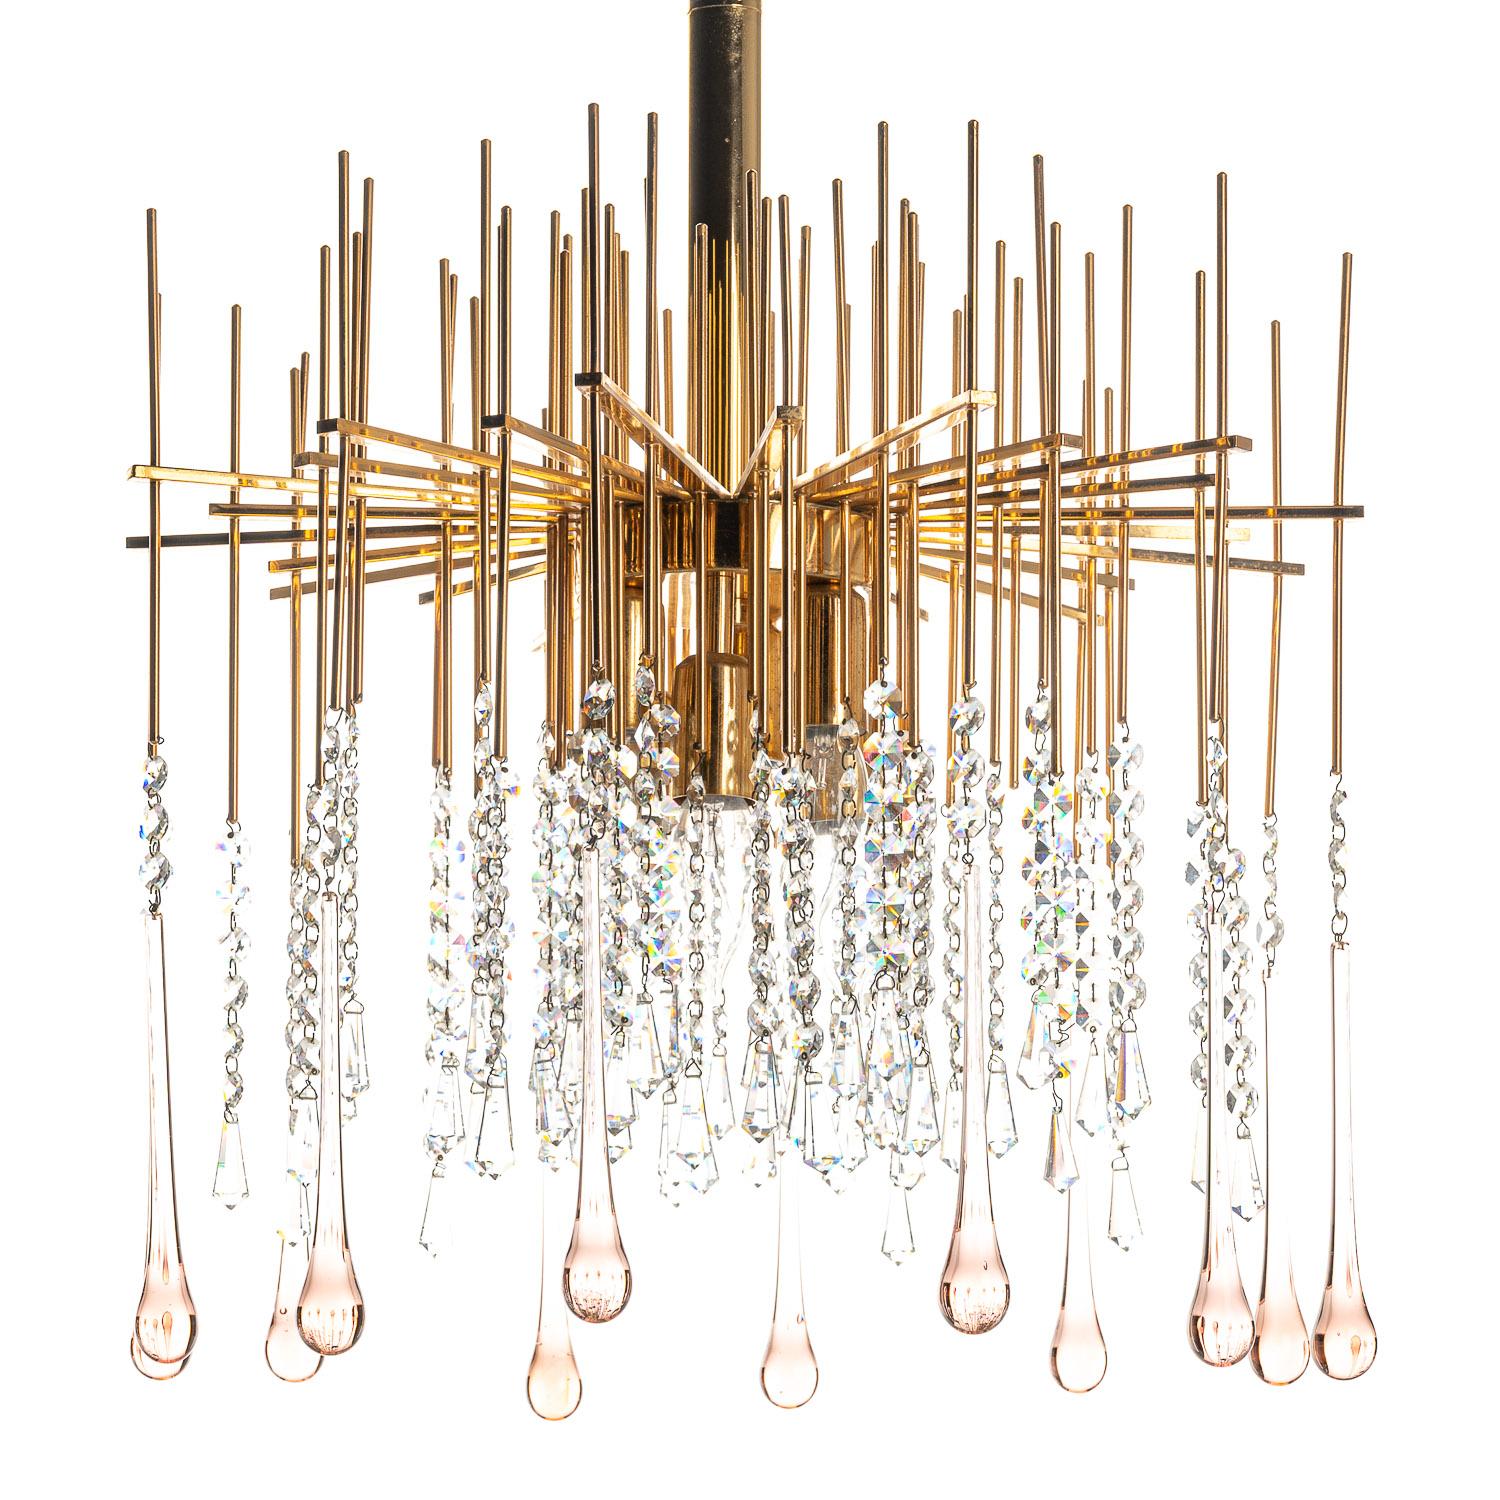 Welcome to this delightful 1950s chandelier, attributed to the designer Palwa. Straight rods radiate vertically and horizontally in a mesmerising form from the brass column, leading to short, pink-tinted crystal drops of various lengths to create a